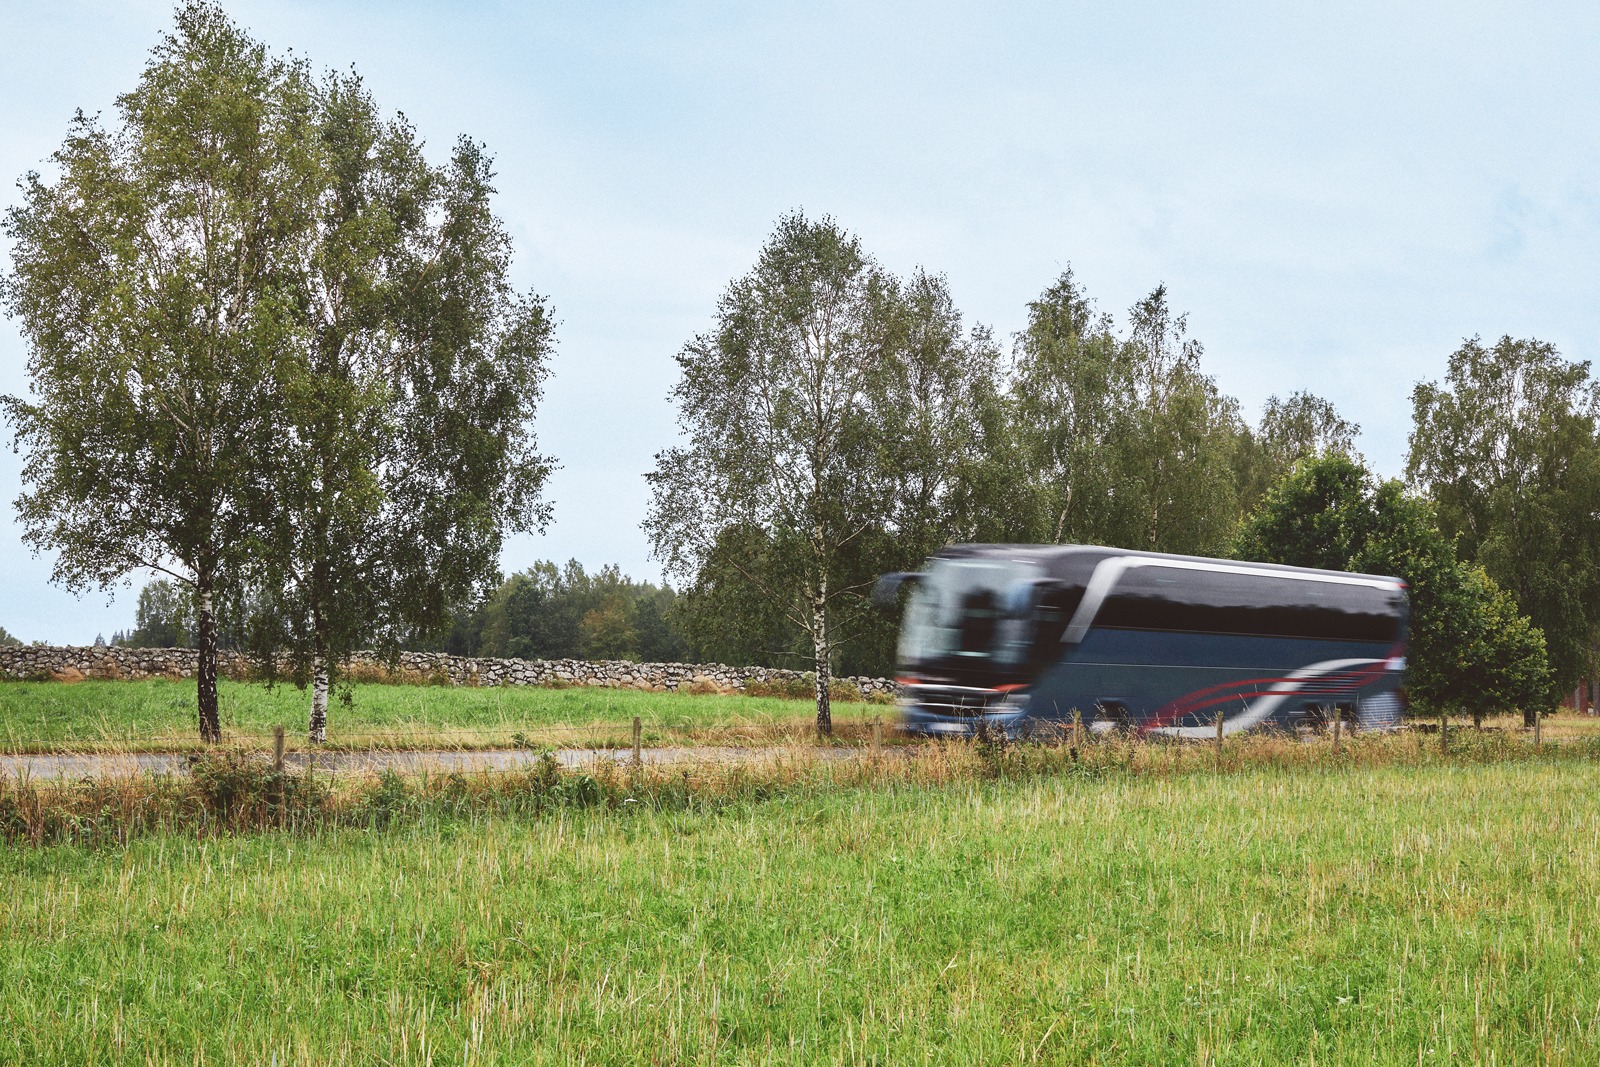 A sunny, green landscape, trees, a road and a modern coach destined for IKEA Museum in Älmhult, Sweden.